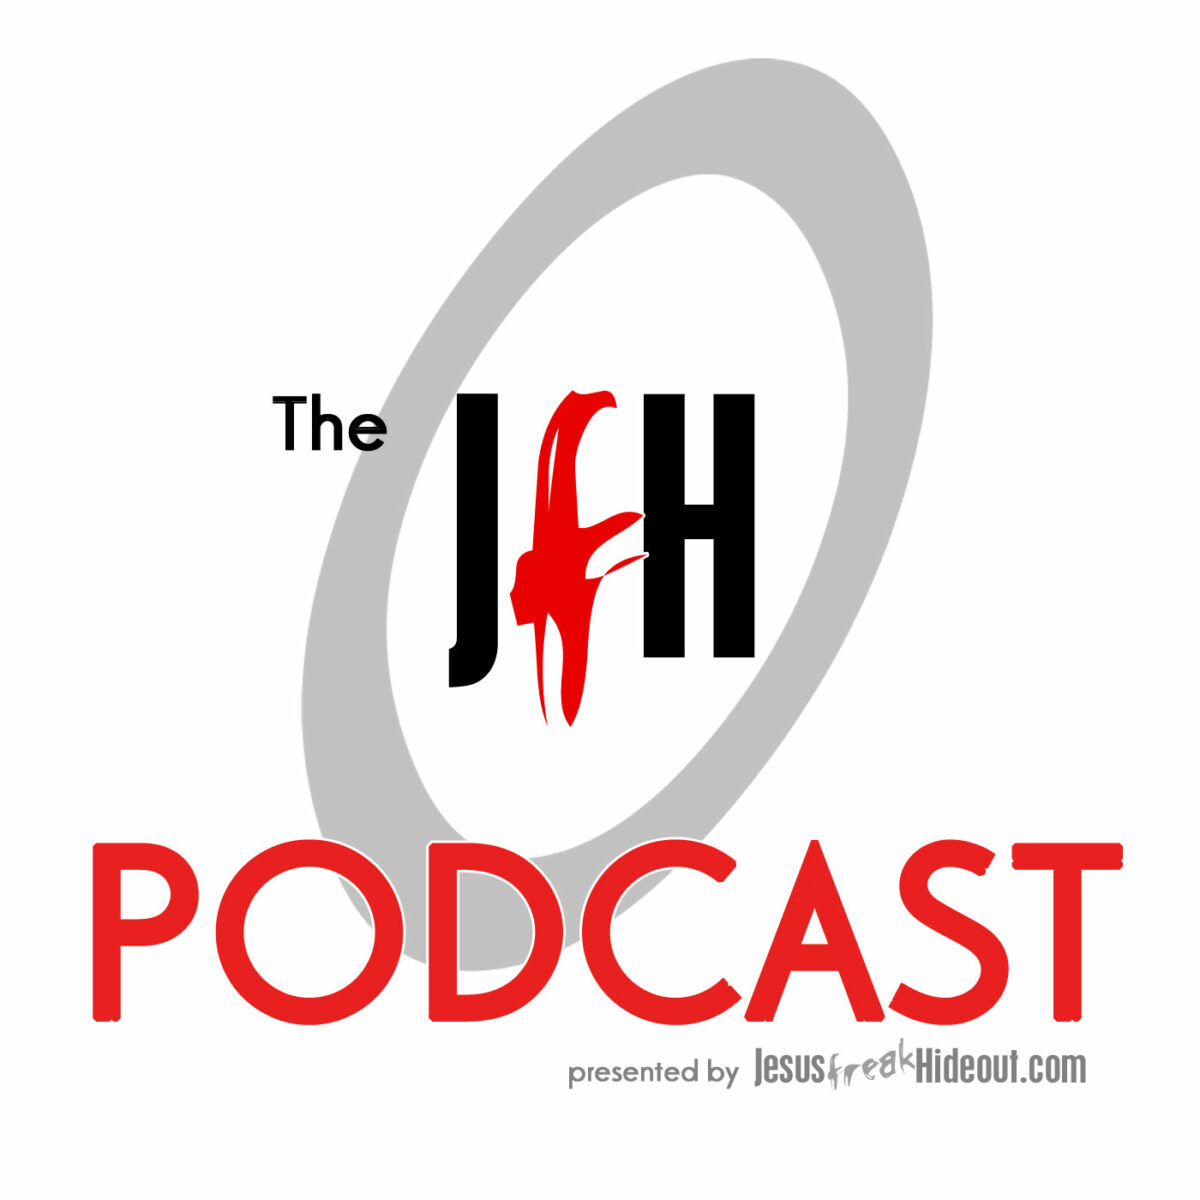 The JFH Podcast 194: 194: Reviewing Switchfoot, Lauren Daigle, Needtobreathe, and Other September Releases